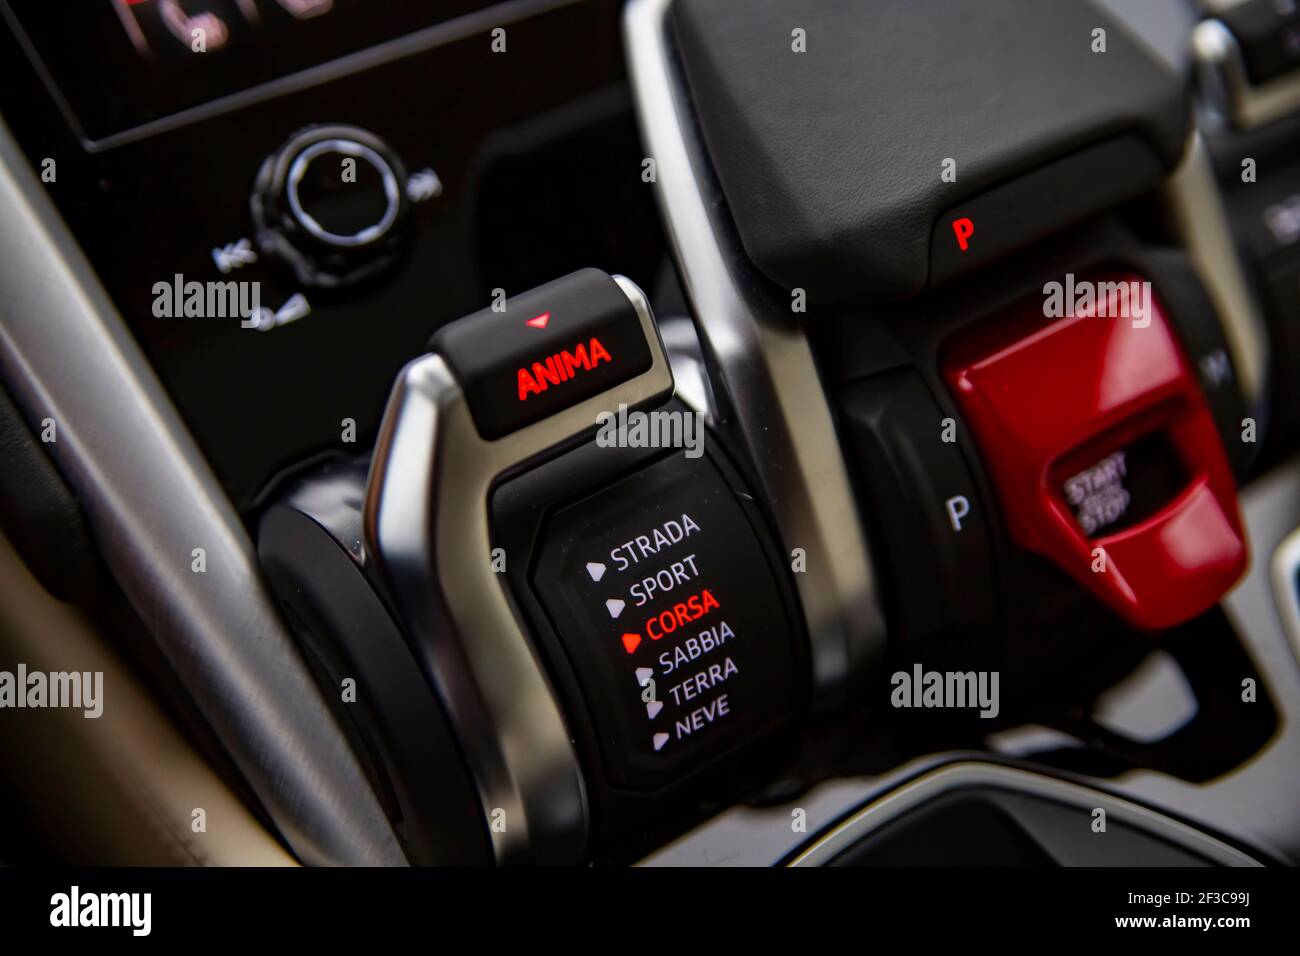 moscow, russia - december 15, 2020: close-up of gearshift and